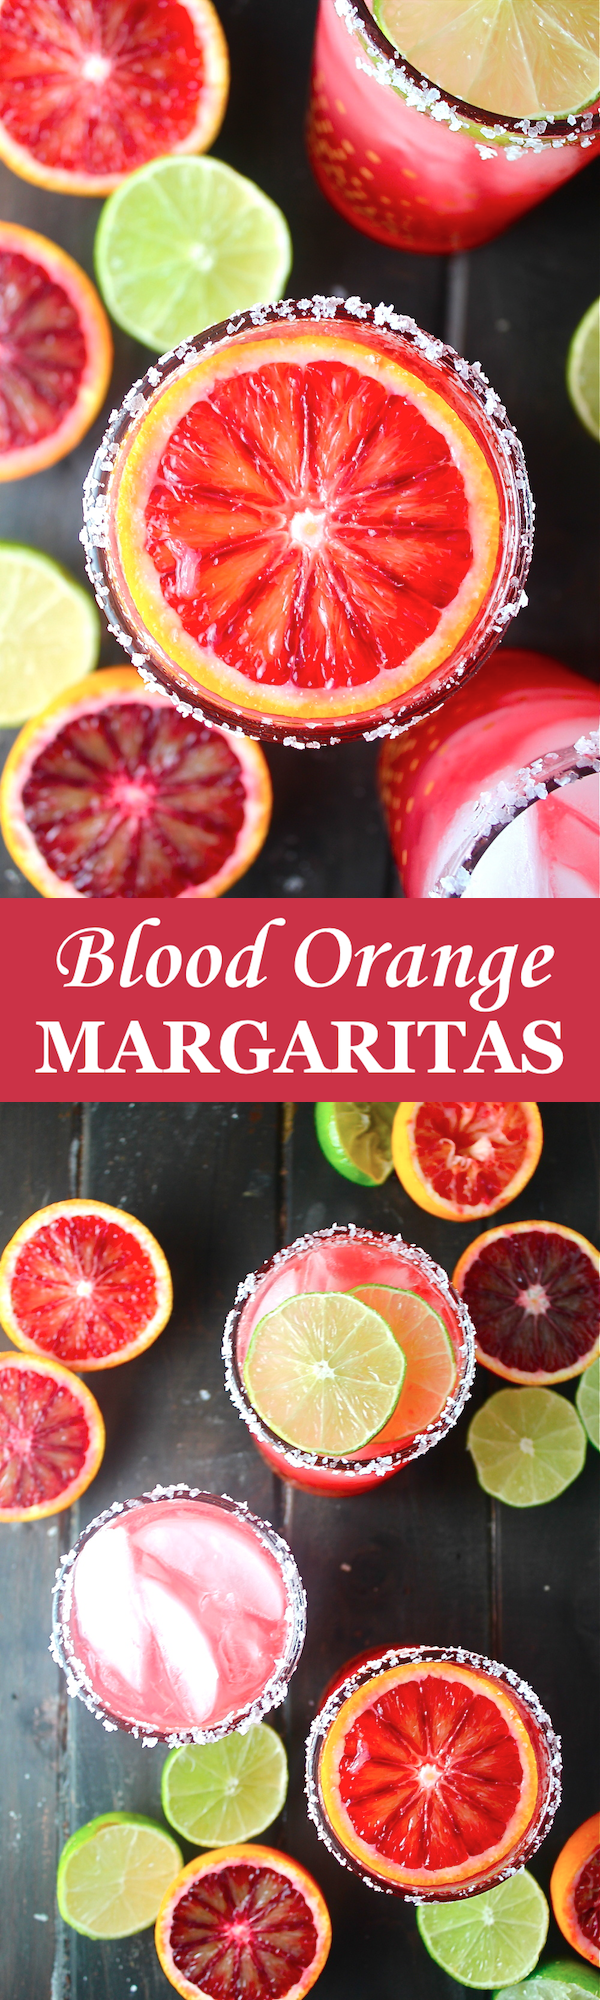 These Blood Orange Margaritas are tart, sweet, and refreshing - the perfect vibrant antidote to the winter gloom! | The Millennial Cook #winterrecipe #drink #margarita #bloodorange #lime